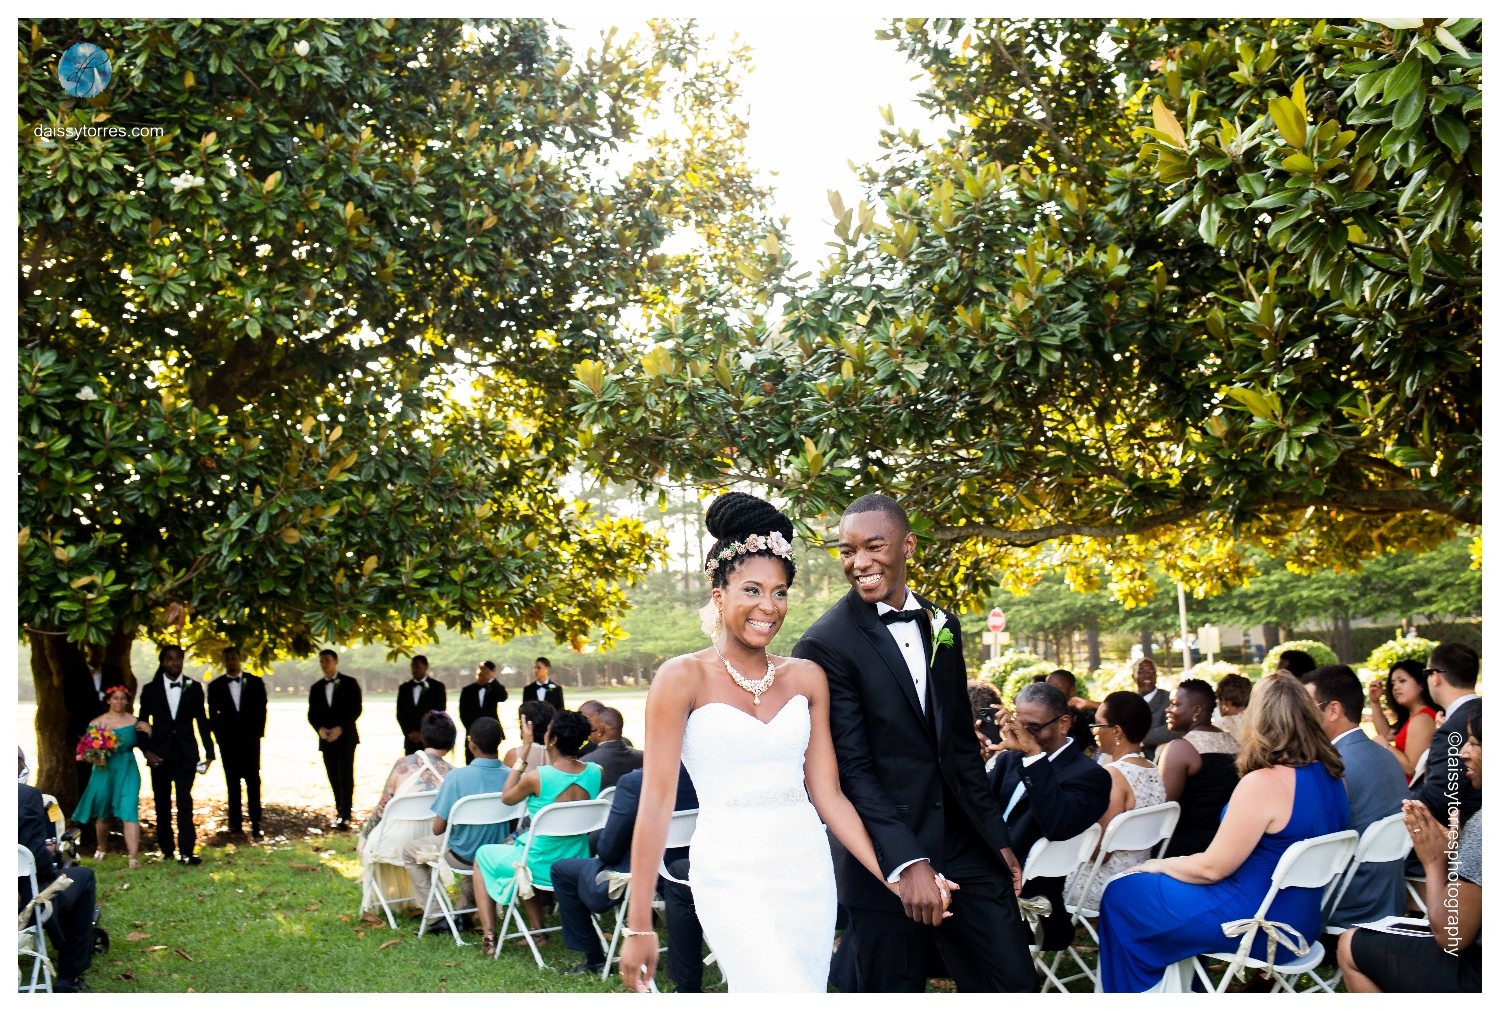 Wedding Ceremony Tips from Daissy Torres Photography